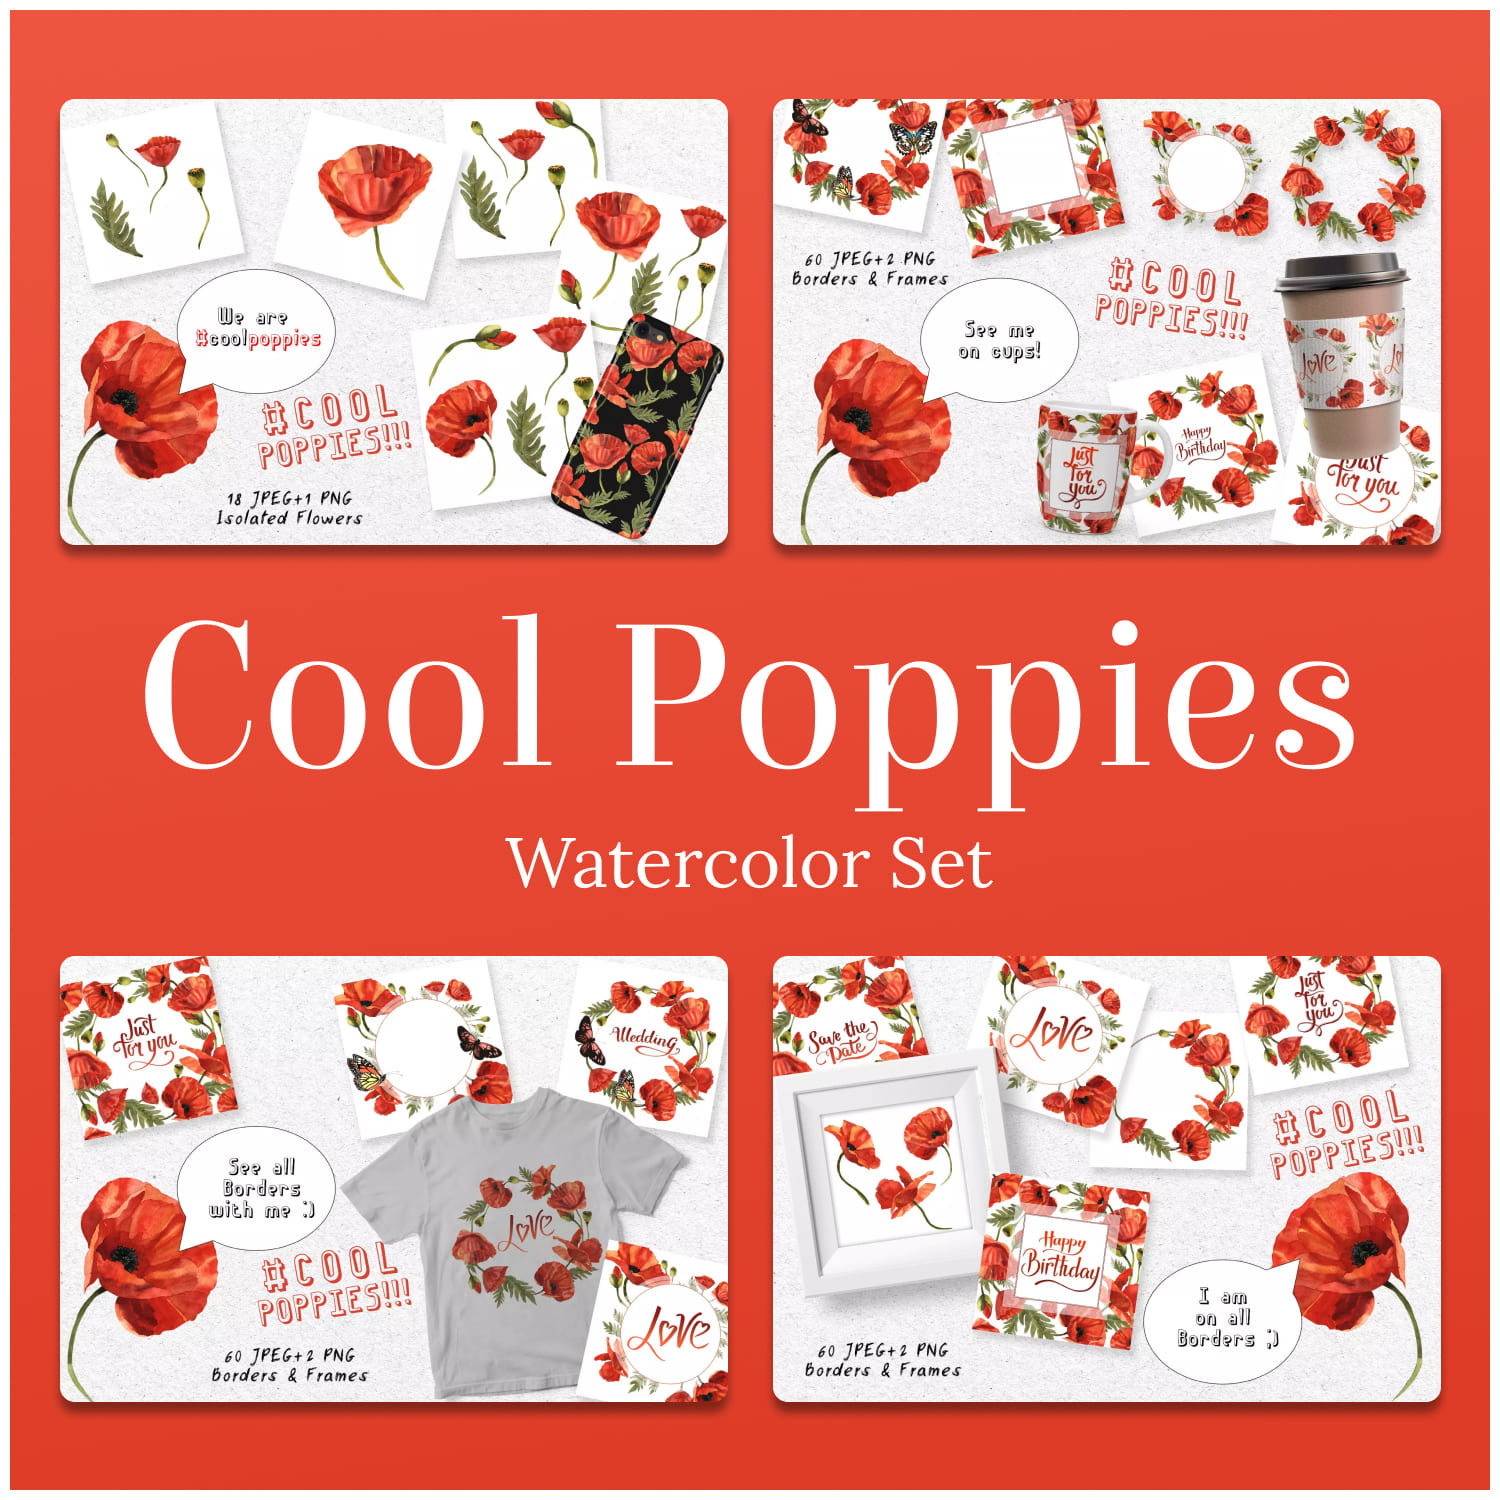 Cool Poppies PNG Watercolor Set main cover.